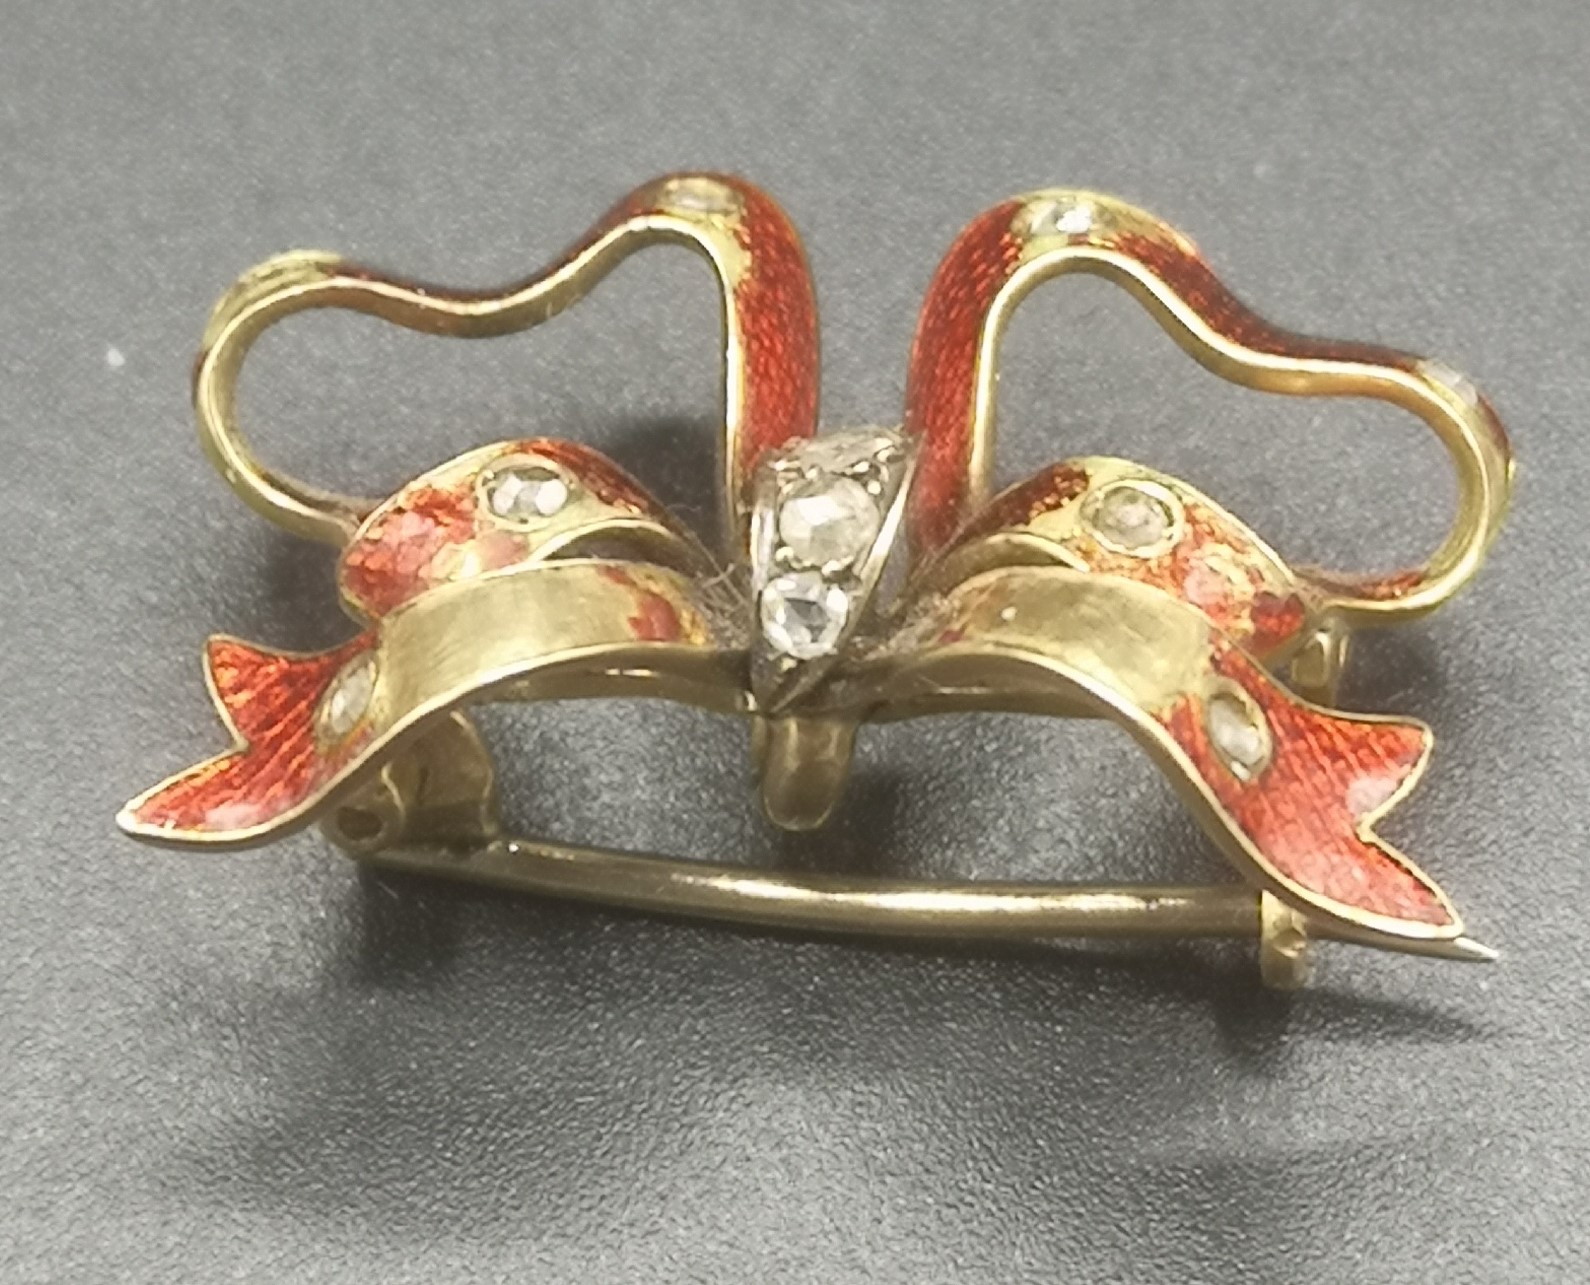 French 18ct gold ribbon brooch - Image 2 of 3